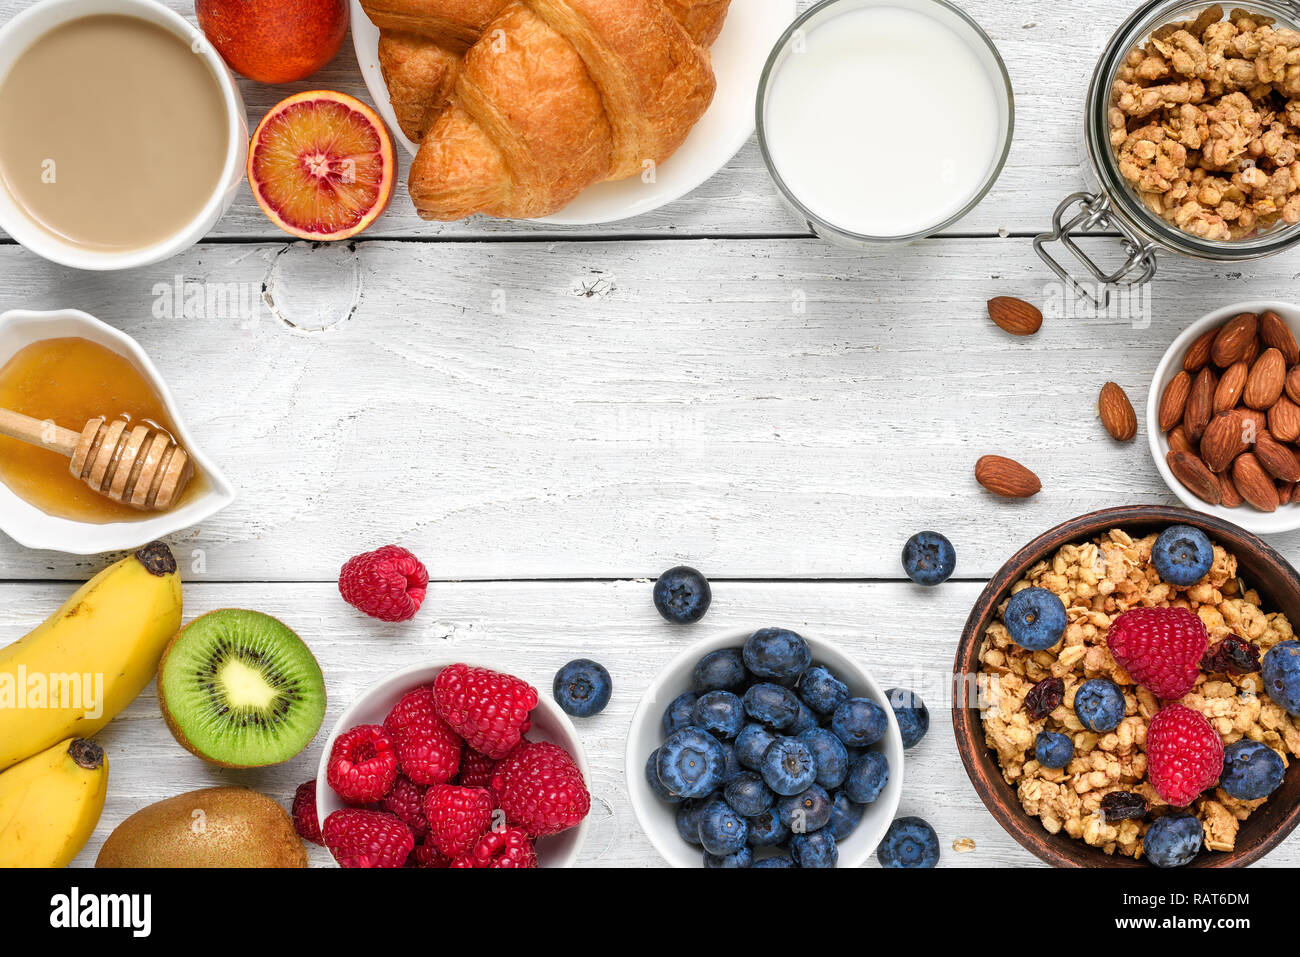 Healthy breakfast with granola muesli, fruits, berries, nuts, croissant and cup of coffee on white wooden background. top view with copy space Stock Photo